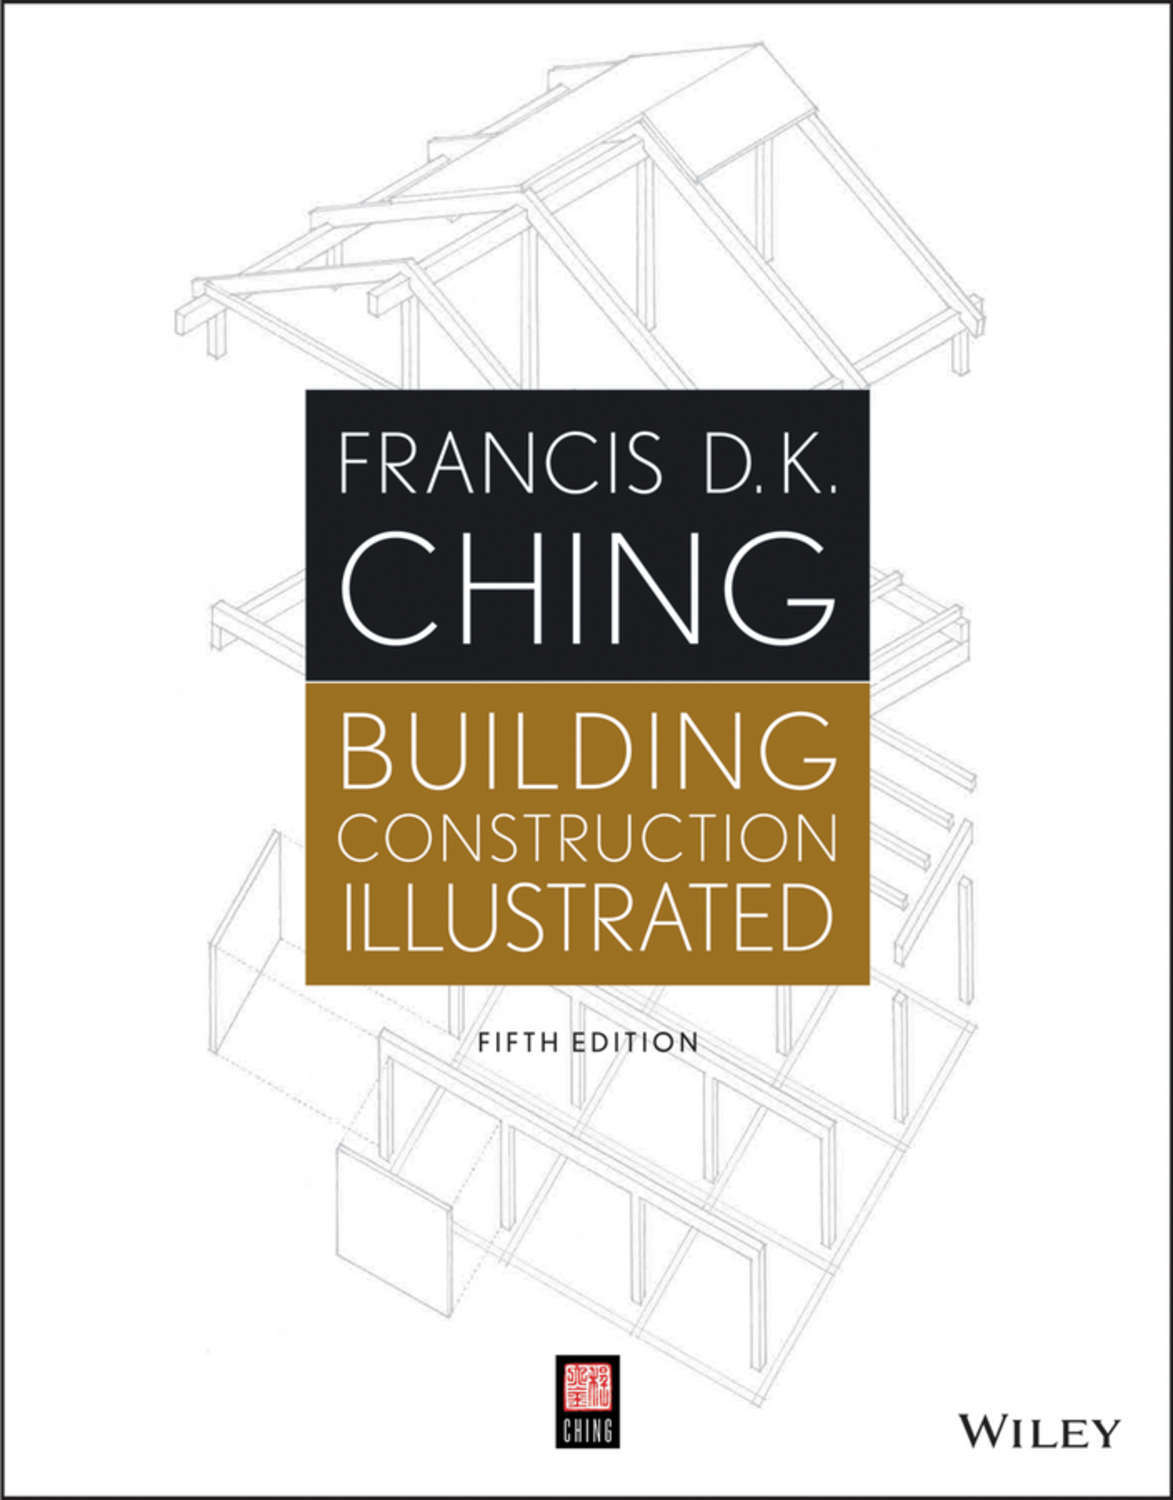 building codes illustrated ching pdf download